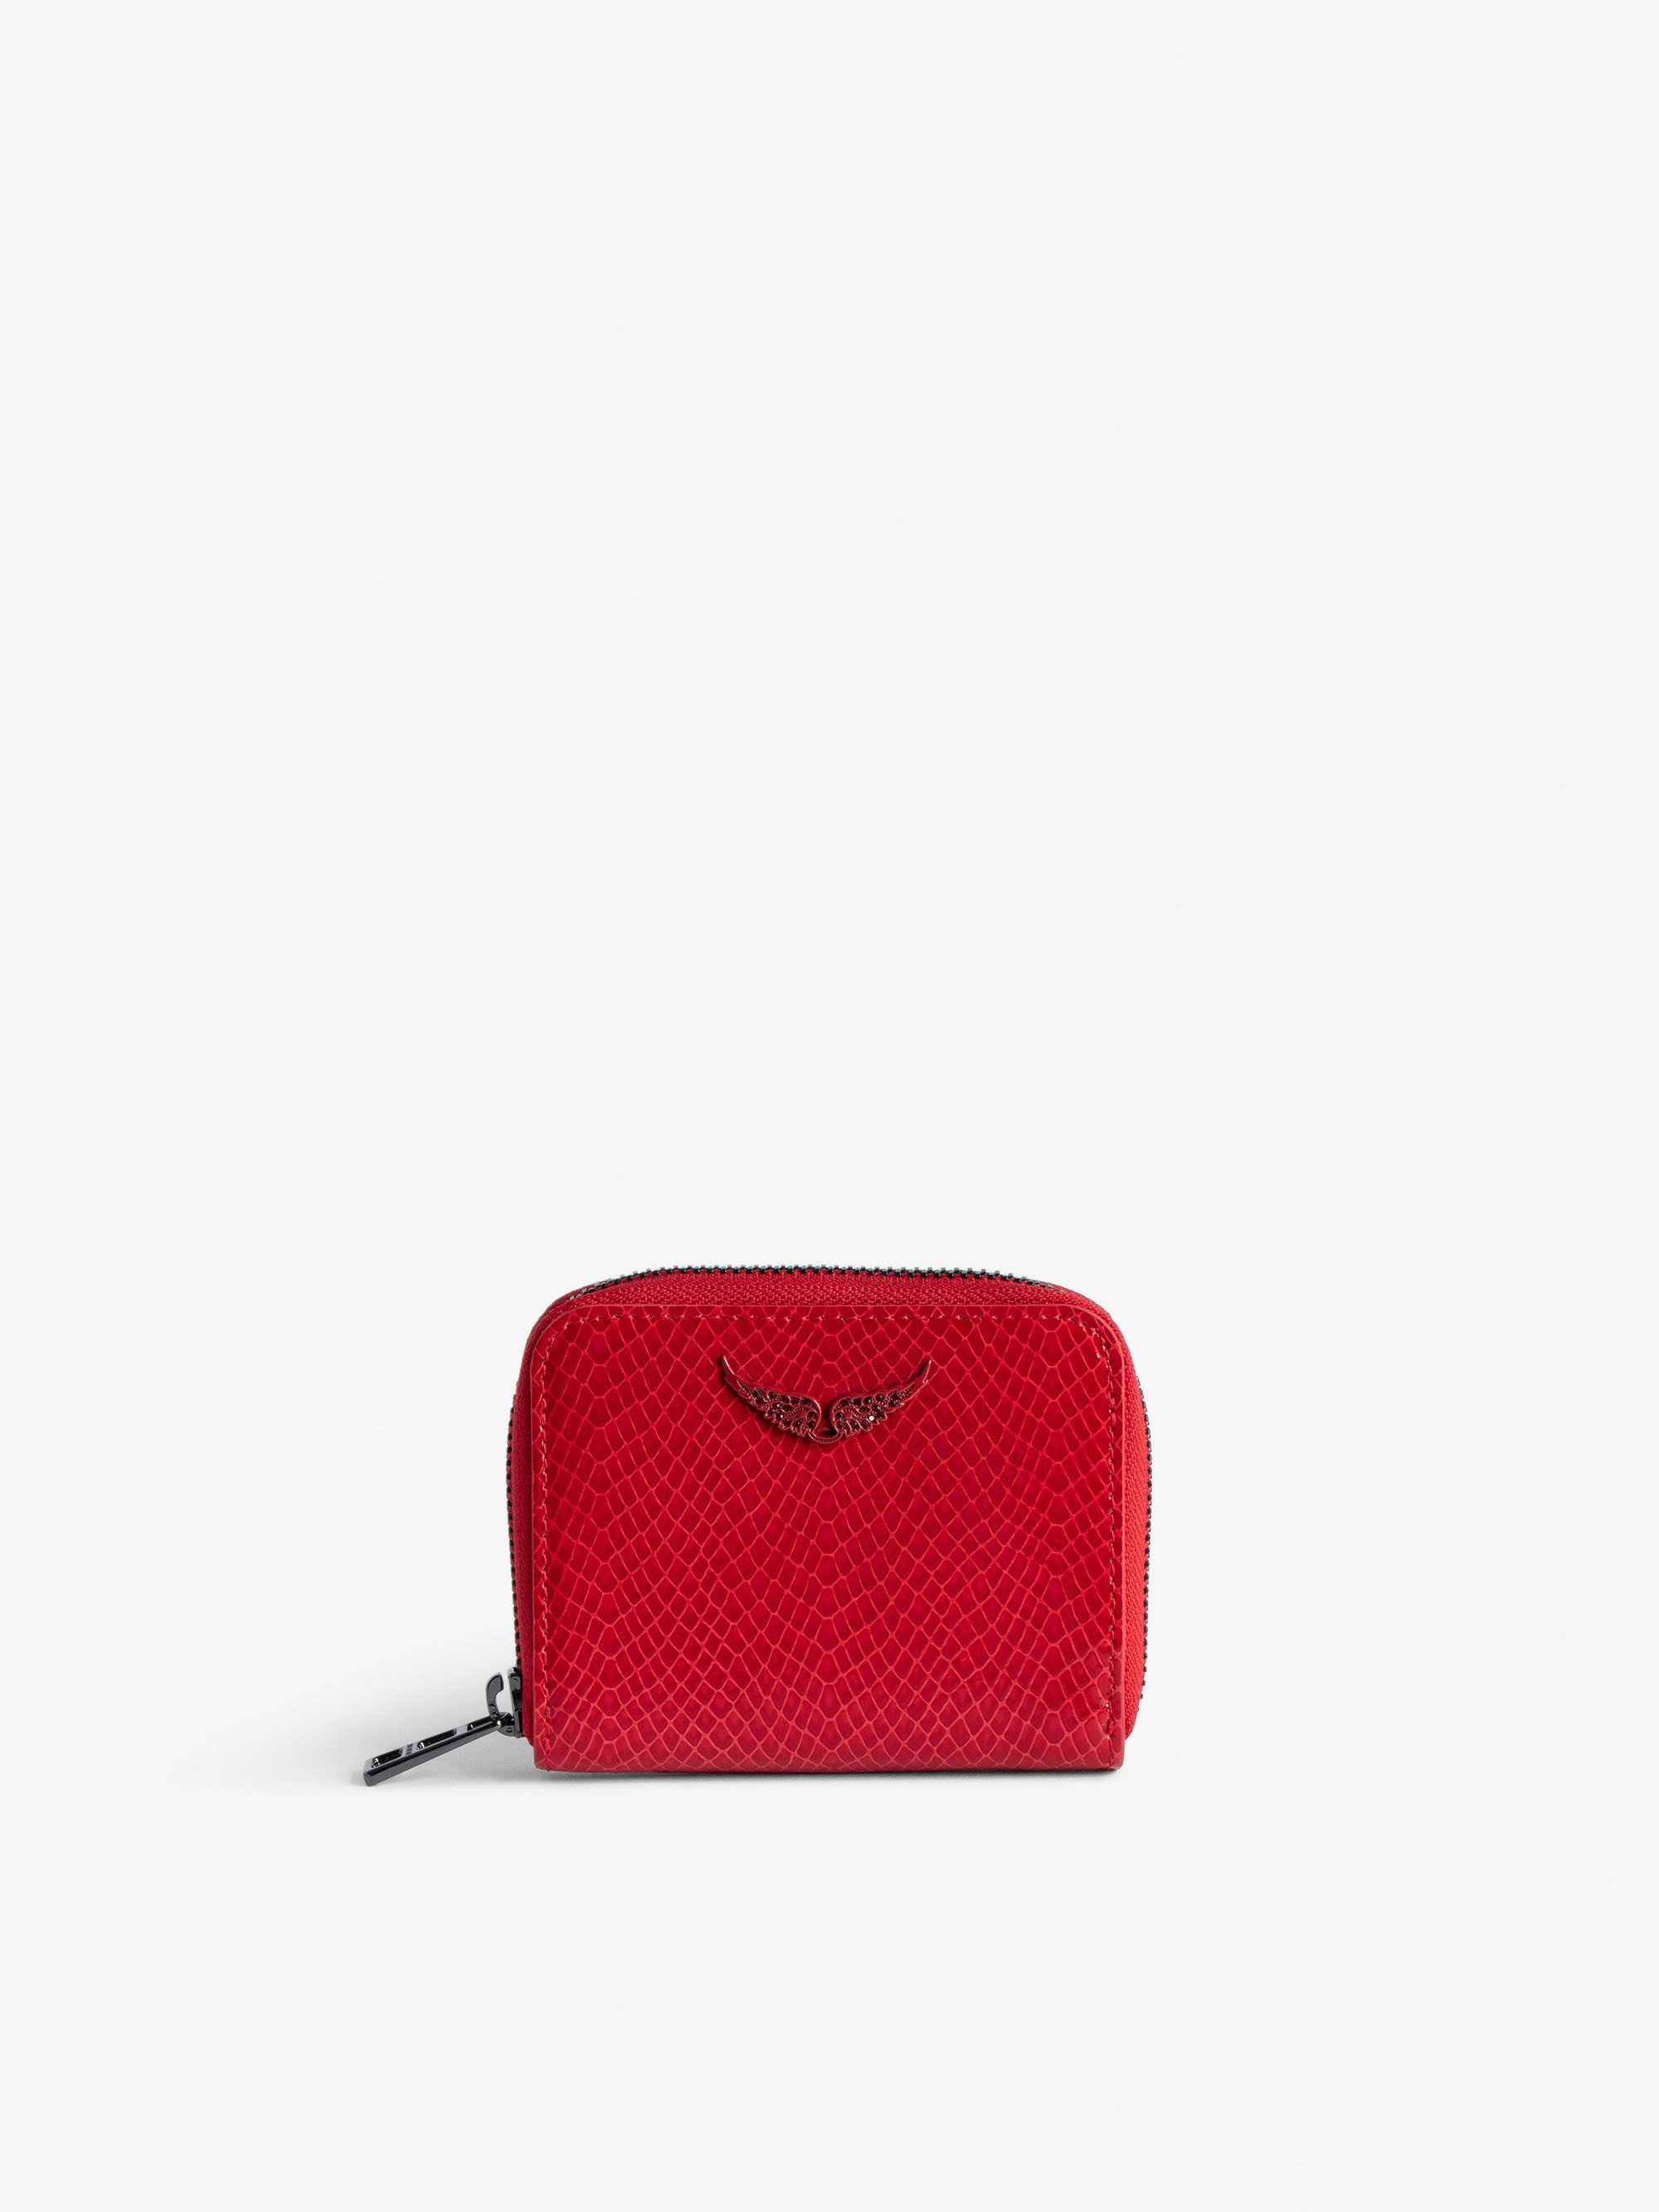 Mini ZV Glossy Wild Embossed Coin Purse - Women’s red python-effect patent leather clutch with wings charm.